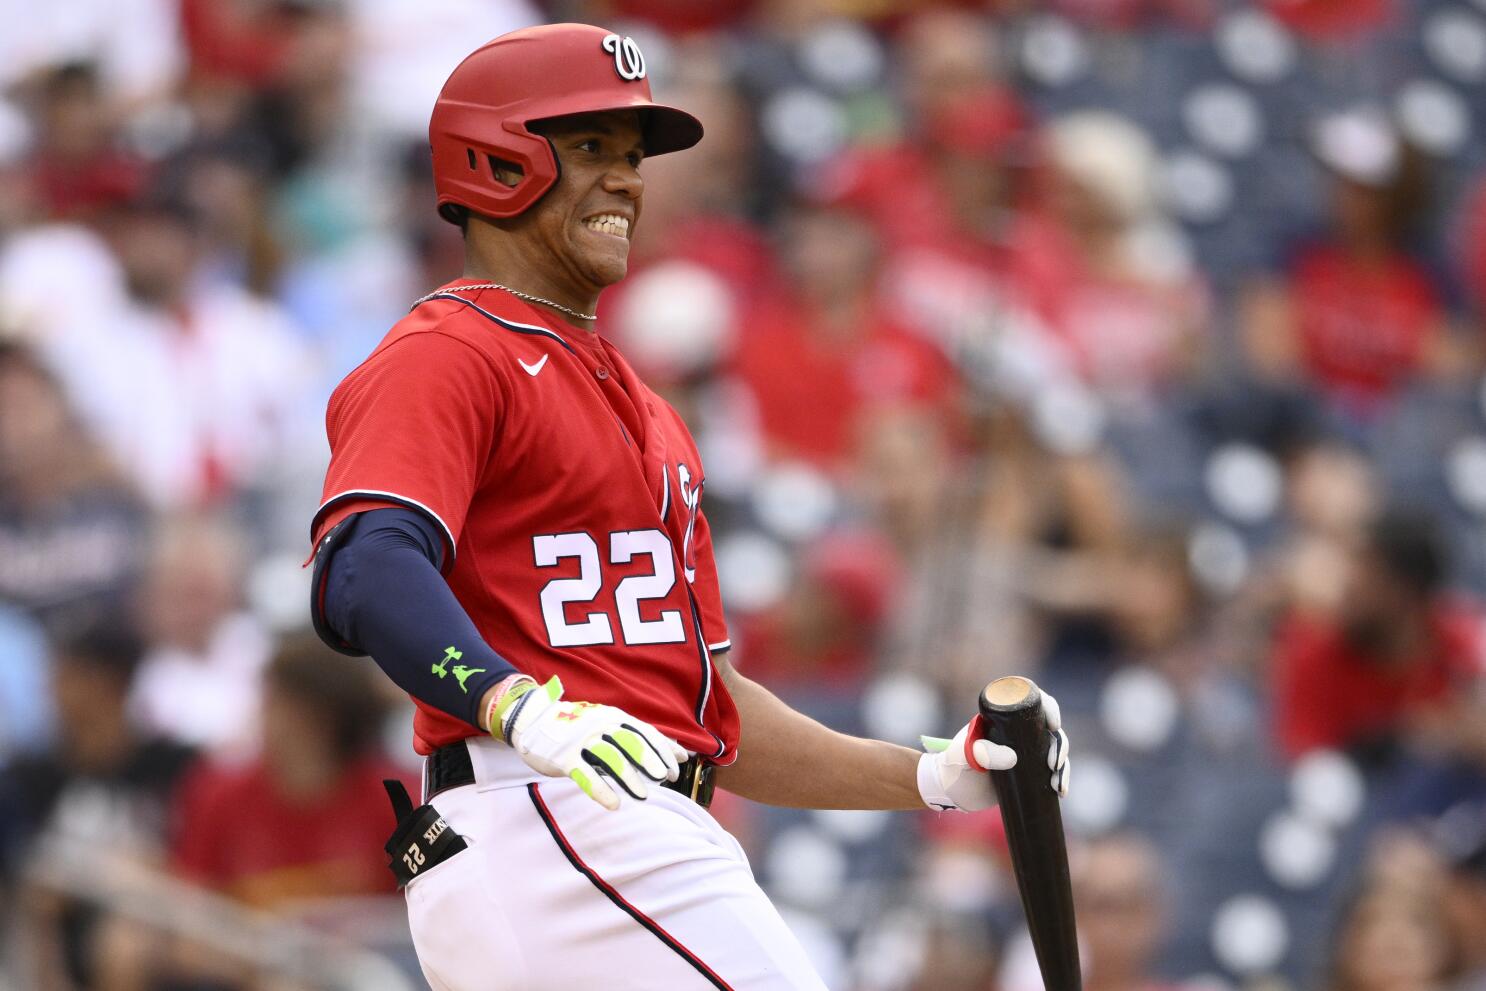 The historic dinger Nationals star Juan Soto wants to hit in 2022